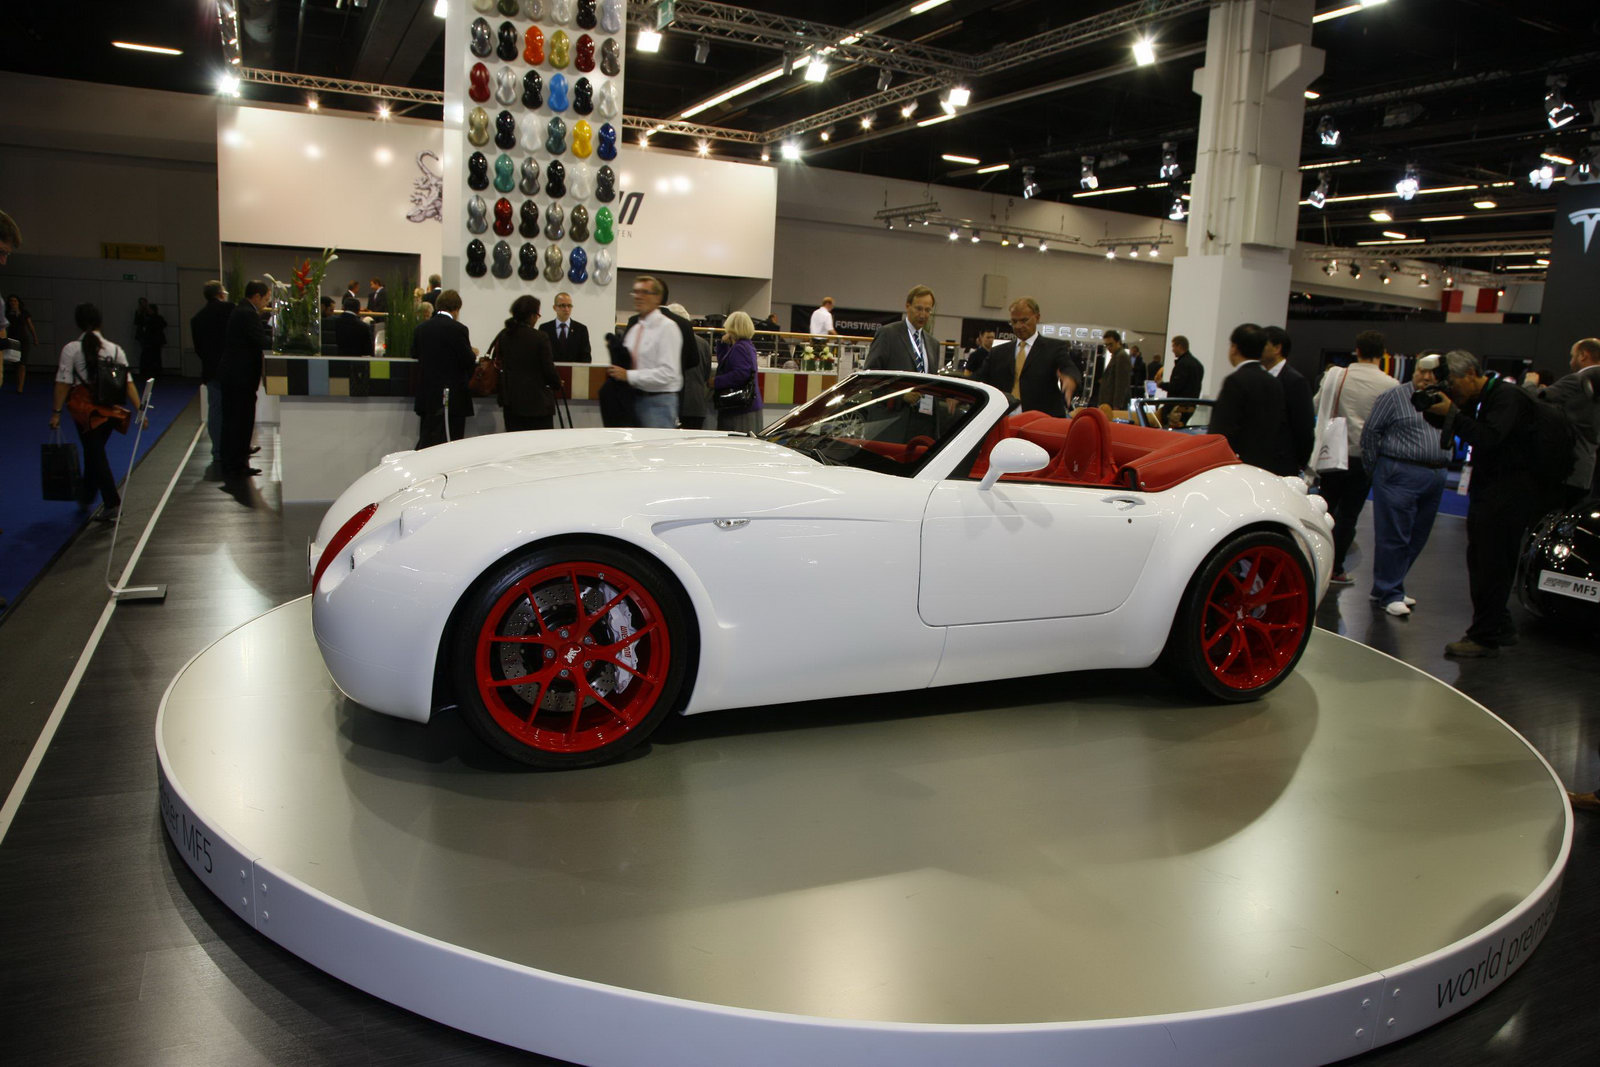 No more BMW V10 engines for Wiesmann MF5